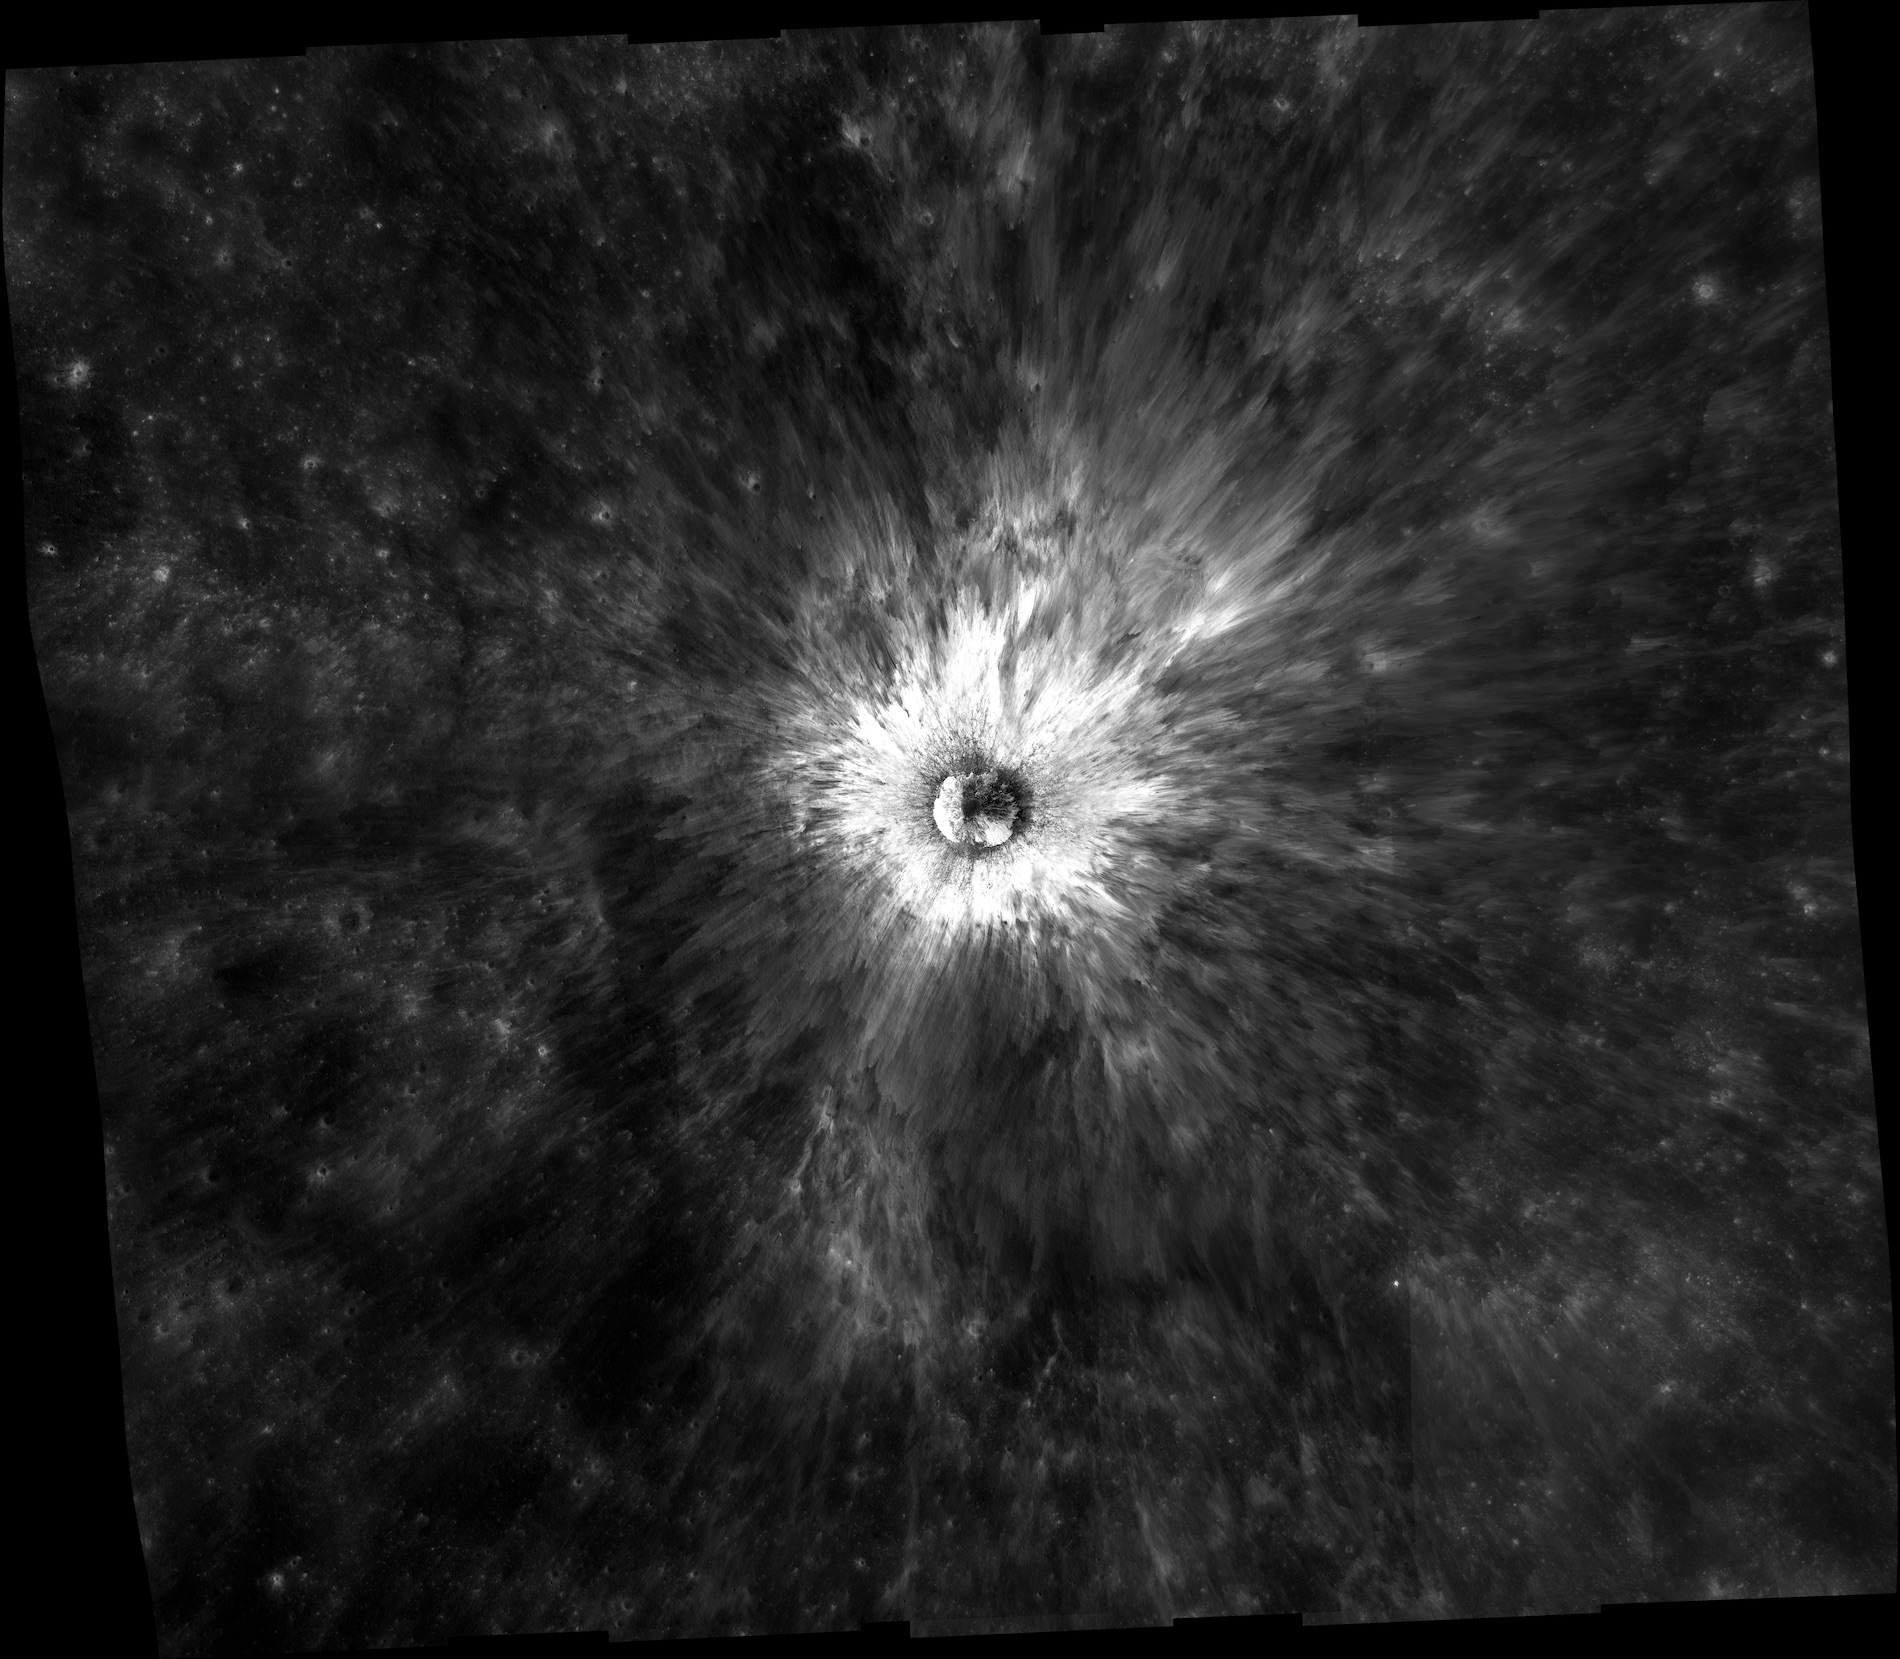 Striking image of a crater on the Moon. Bright white rays spread out from a circle in the middle over a dark gray background.